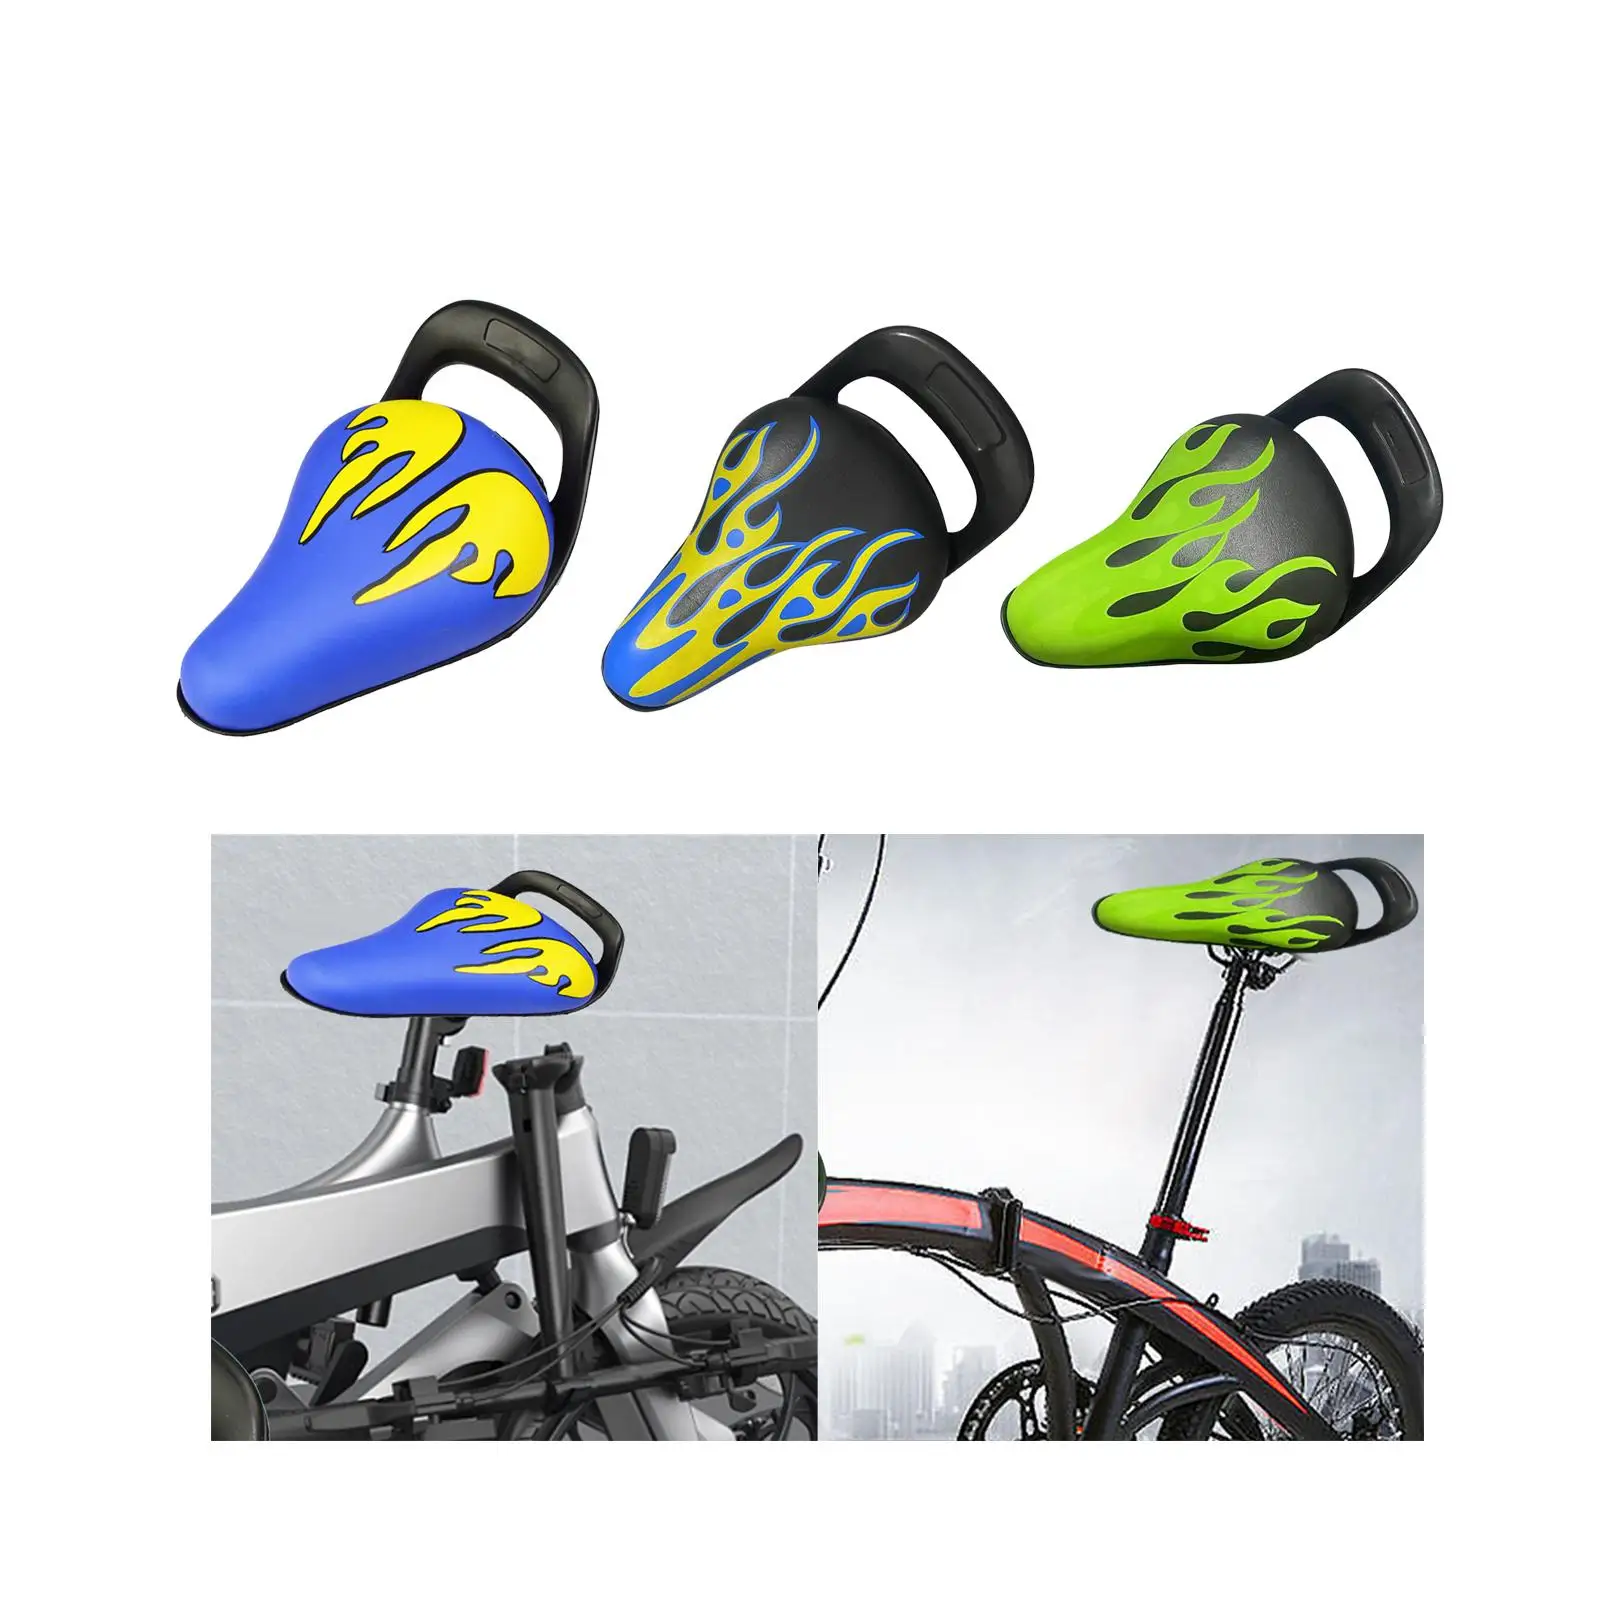 Kids Bicycle Saddle Waterproof for Diameter Seatpost W/ Handle Child Bikes Seat for Kids for Boys and Girls Bicycle